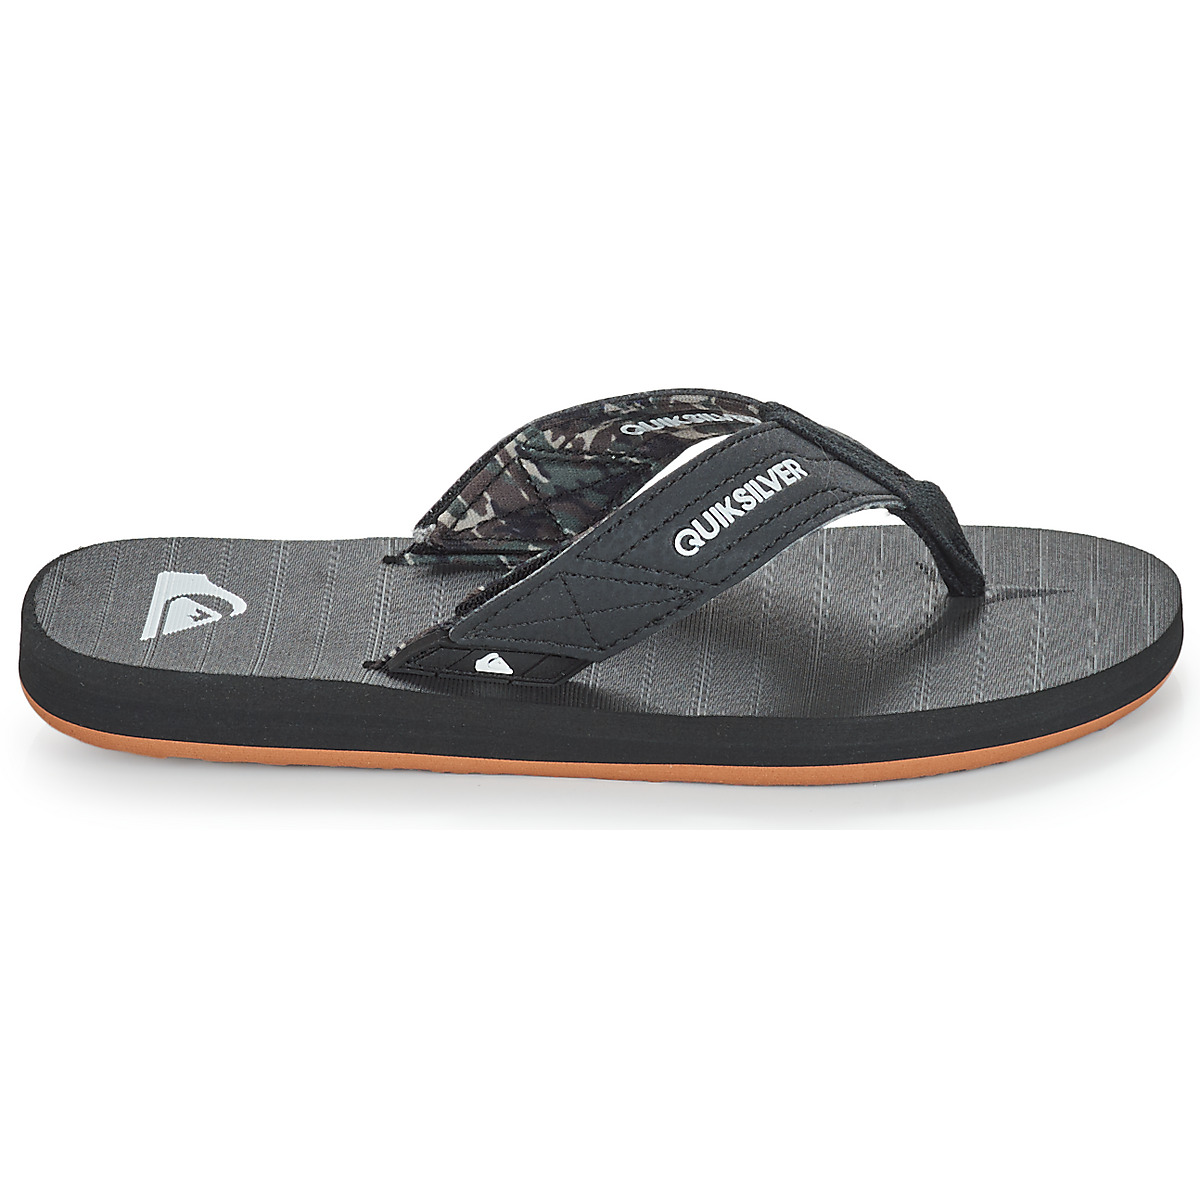 Quiksilver Noir CARVER SWITCH YOUTH KMAWcJr4